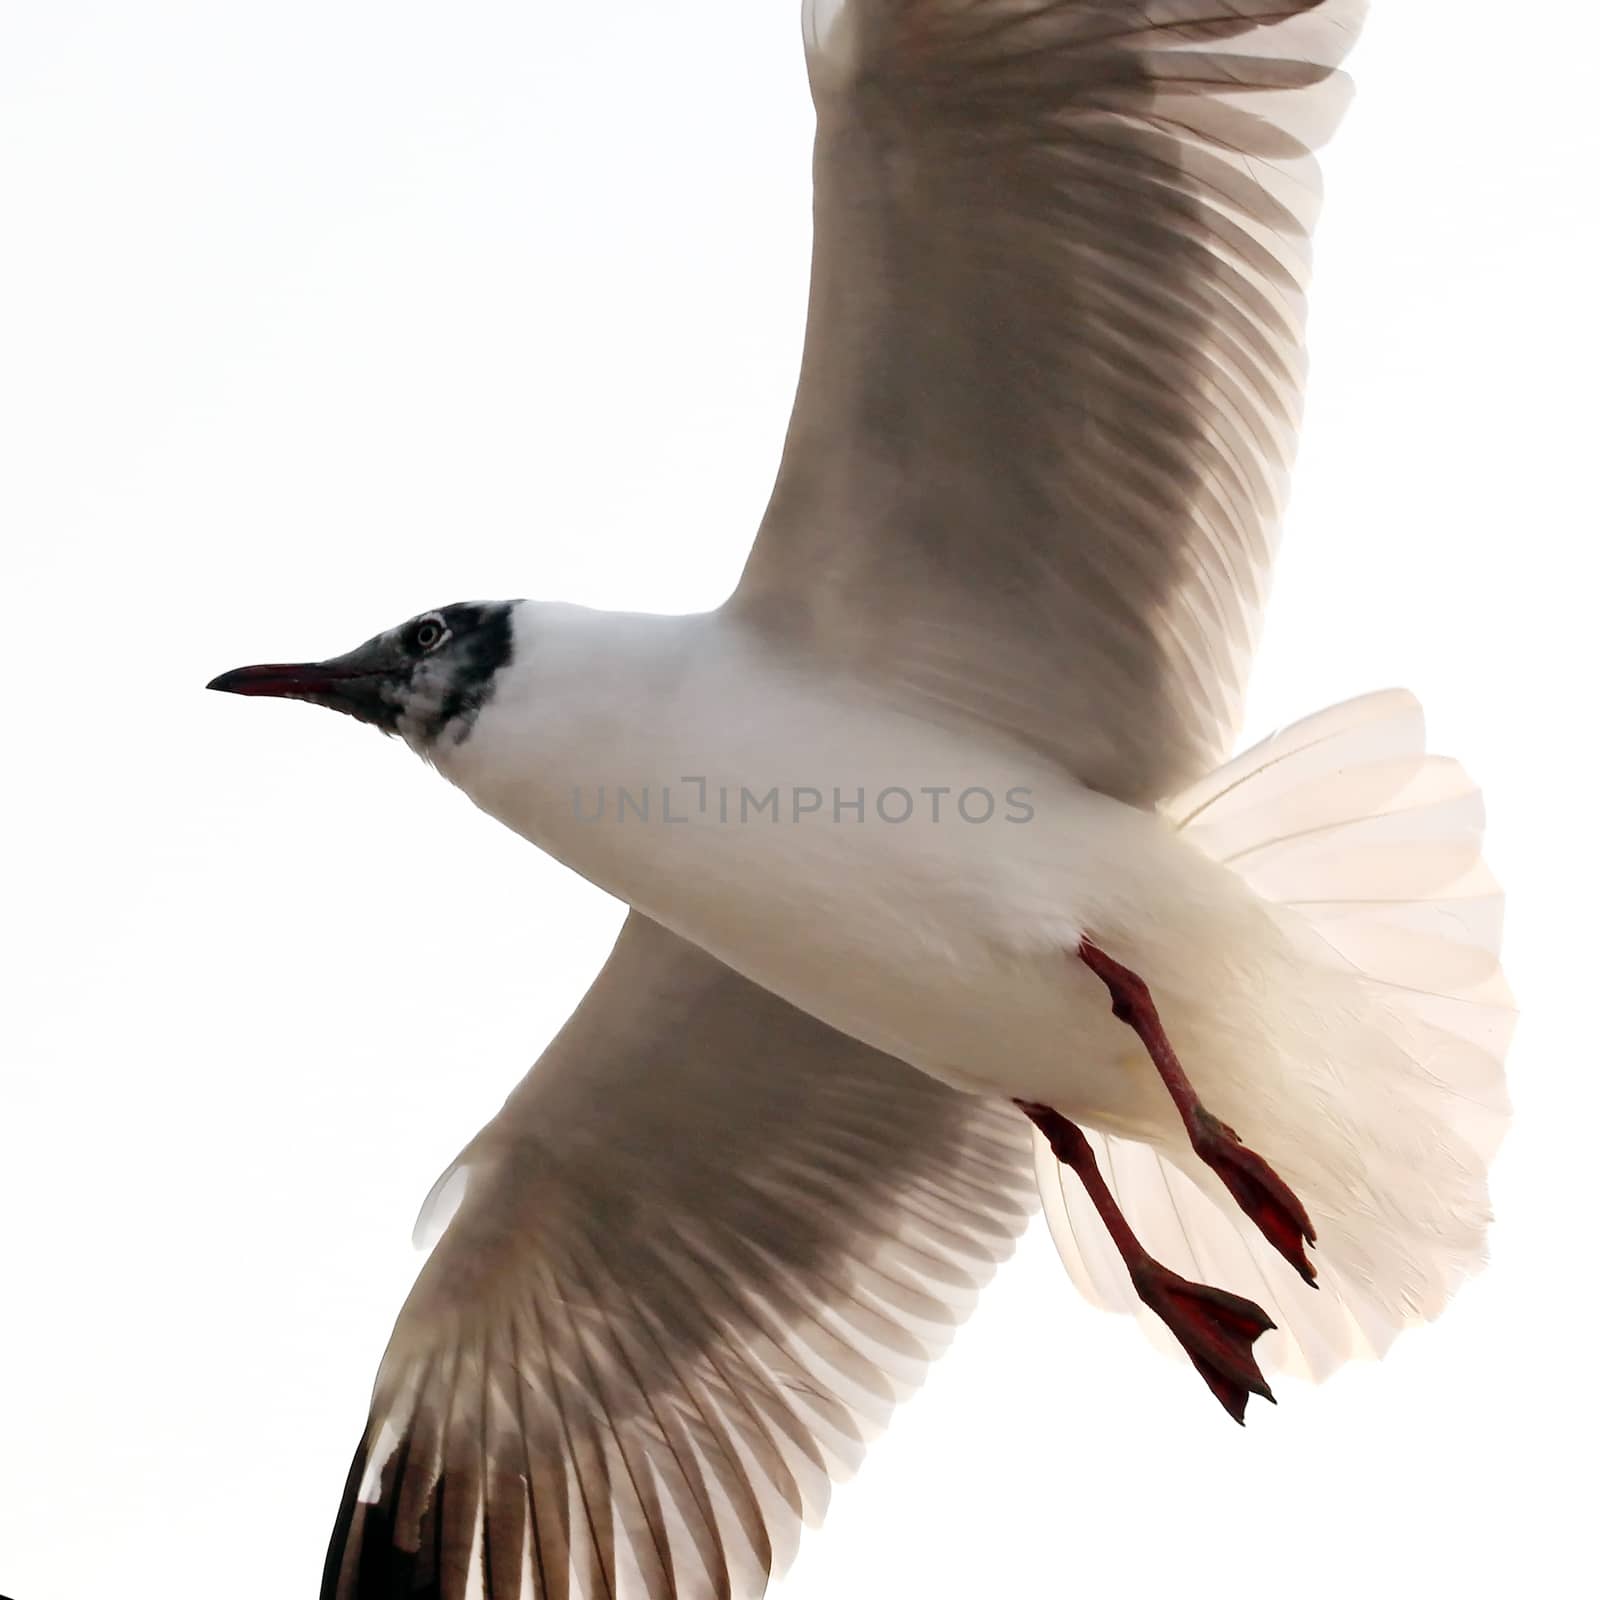 Flying seagull  isolated on white background